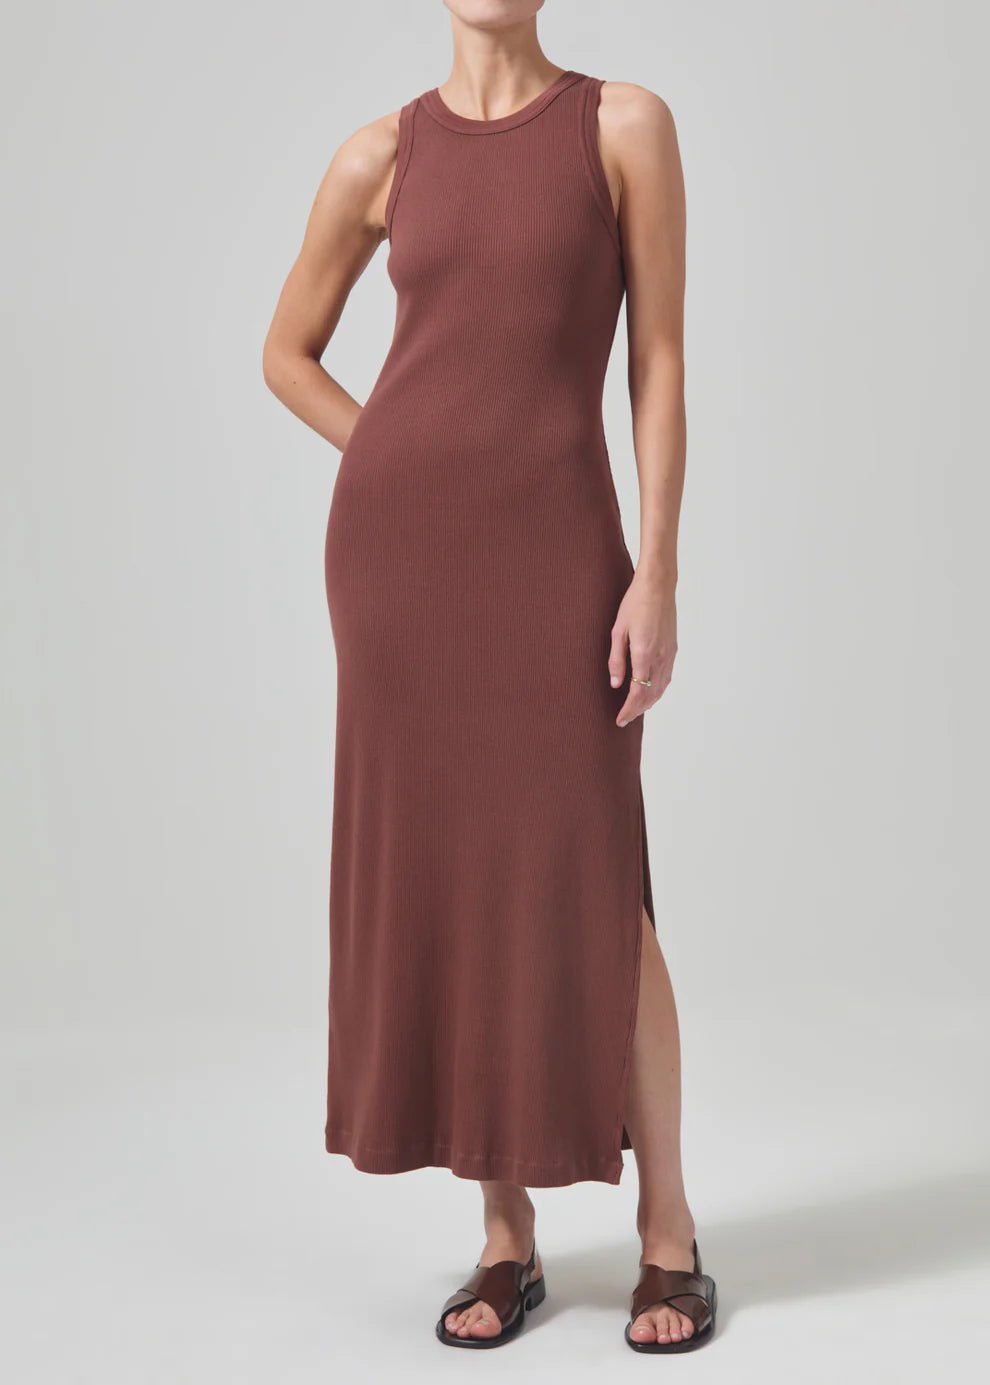 Citizens of Humanity Isabella Dress in Mink